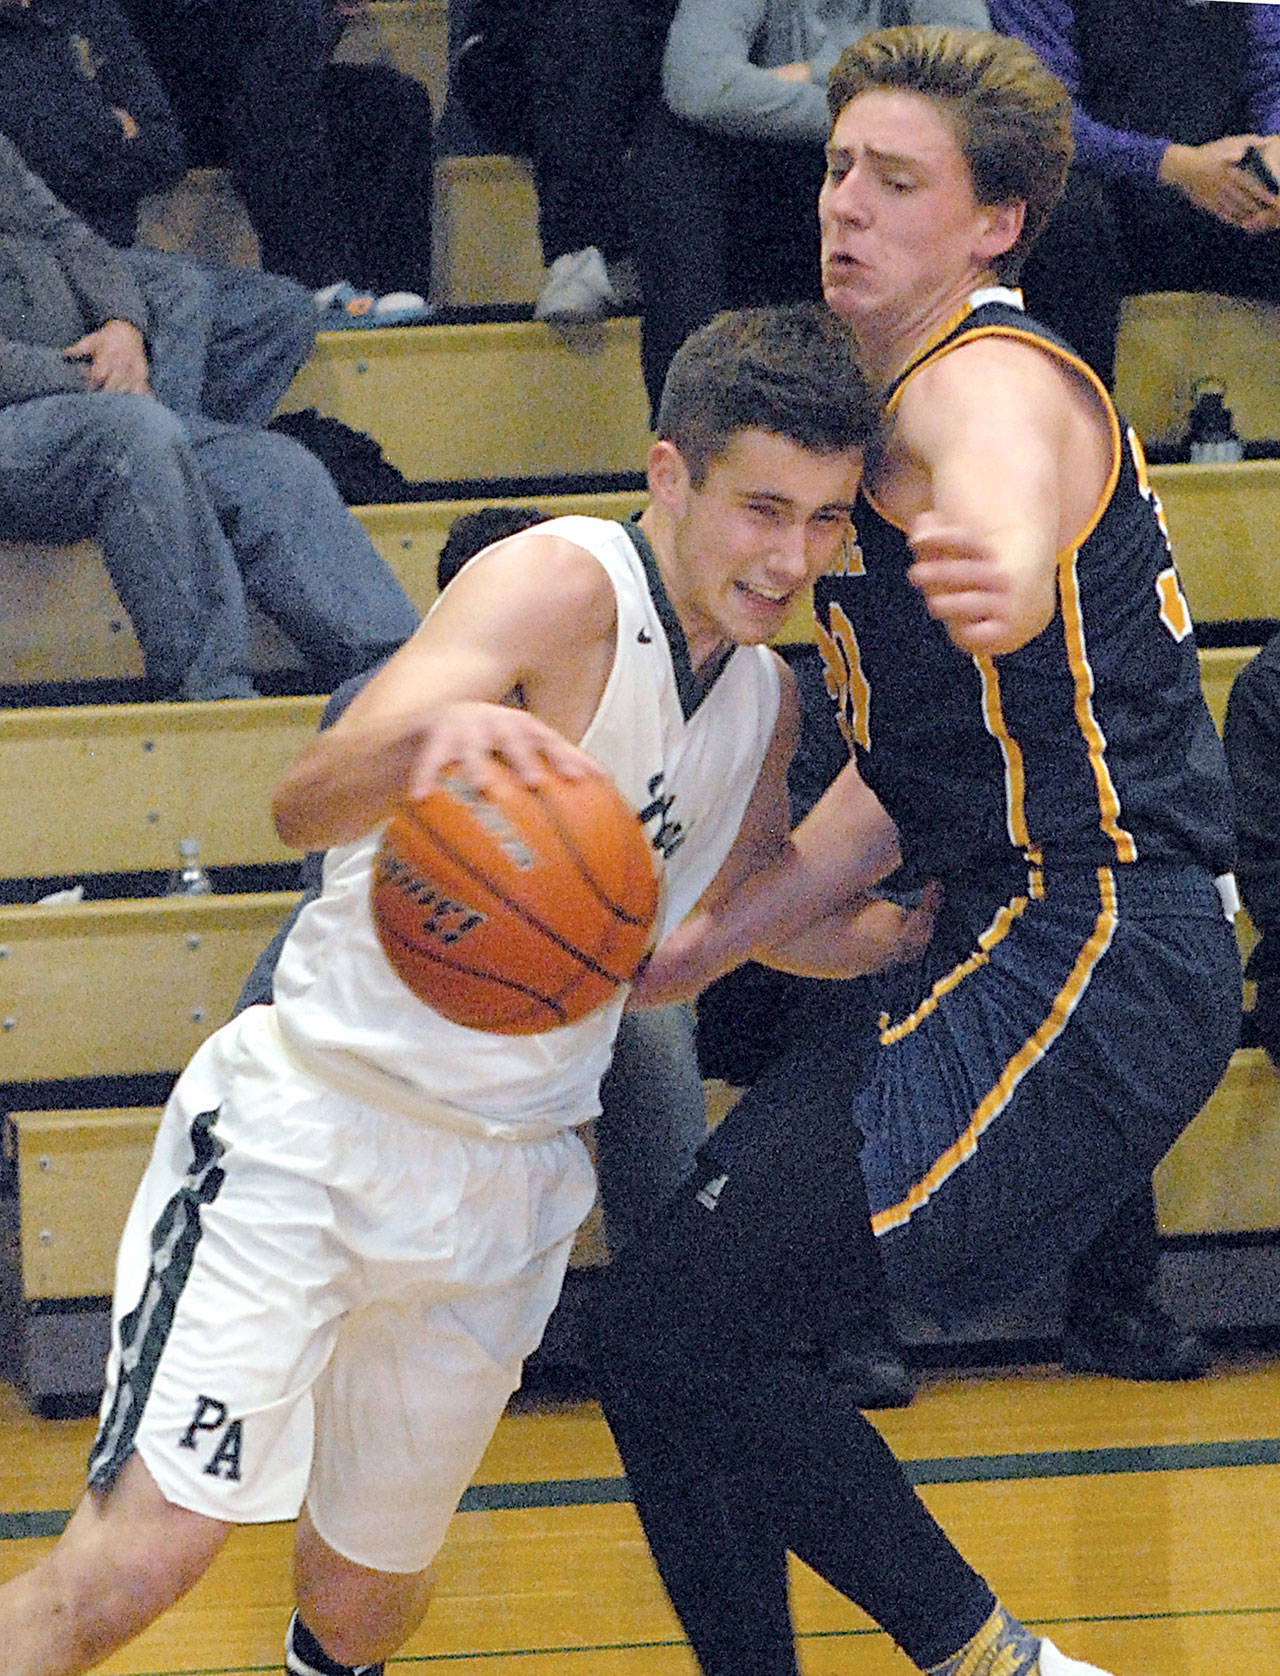 Port Angeles’ Kyle Benedict, left, drives to the lane past Bainbridge’s Charlie Hoberg in the first quarter of Tuesday night’s game at Port Angeles High School. (Keith Thorpe/Peninsula Daily News)